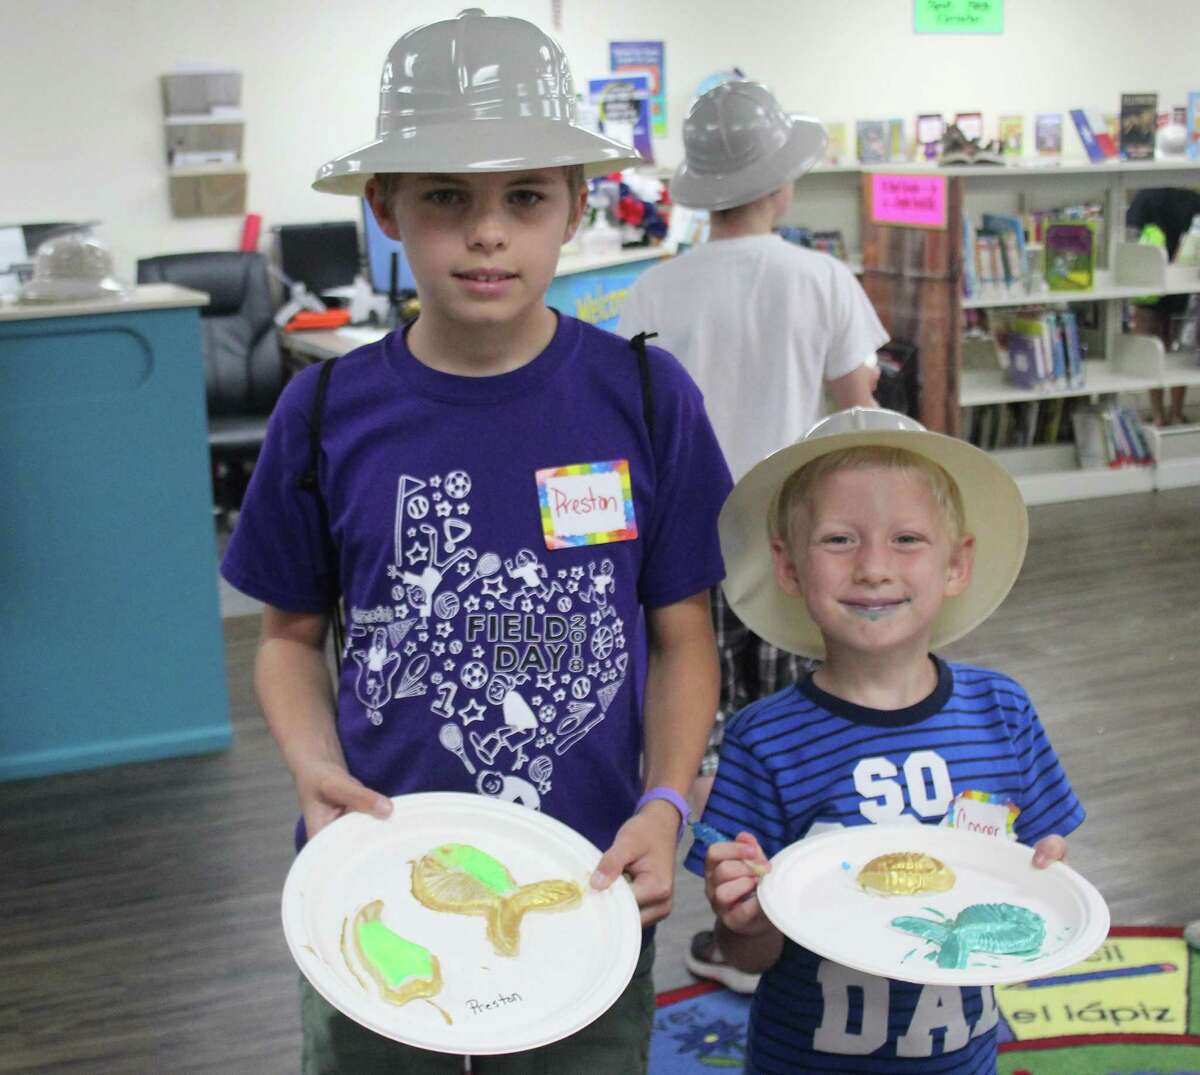 Preston Wiese (left) and Cooper Fulcher (right) show off the painted fossils tthey made at the Shepherd Public Library’s Summer Reading program on June 19.